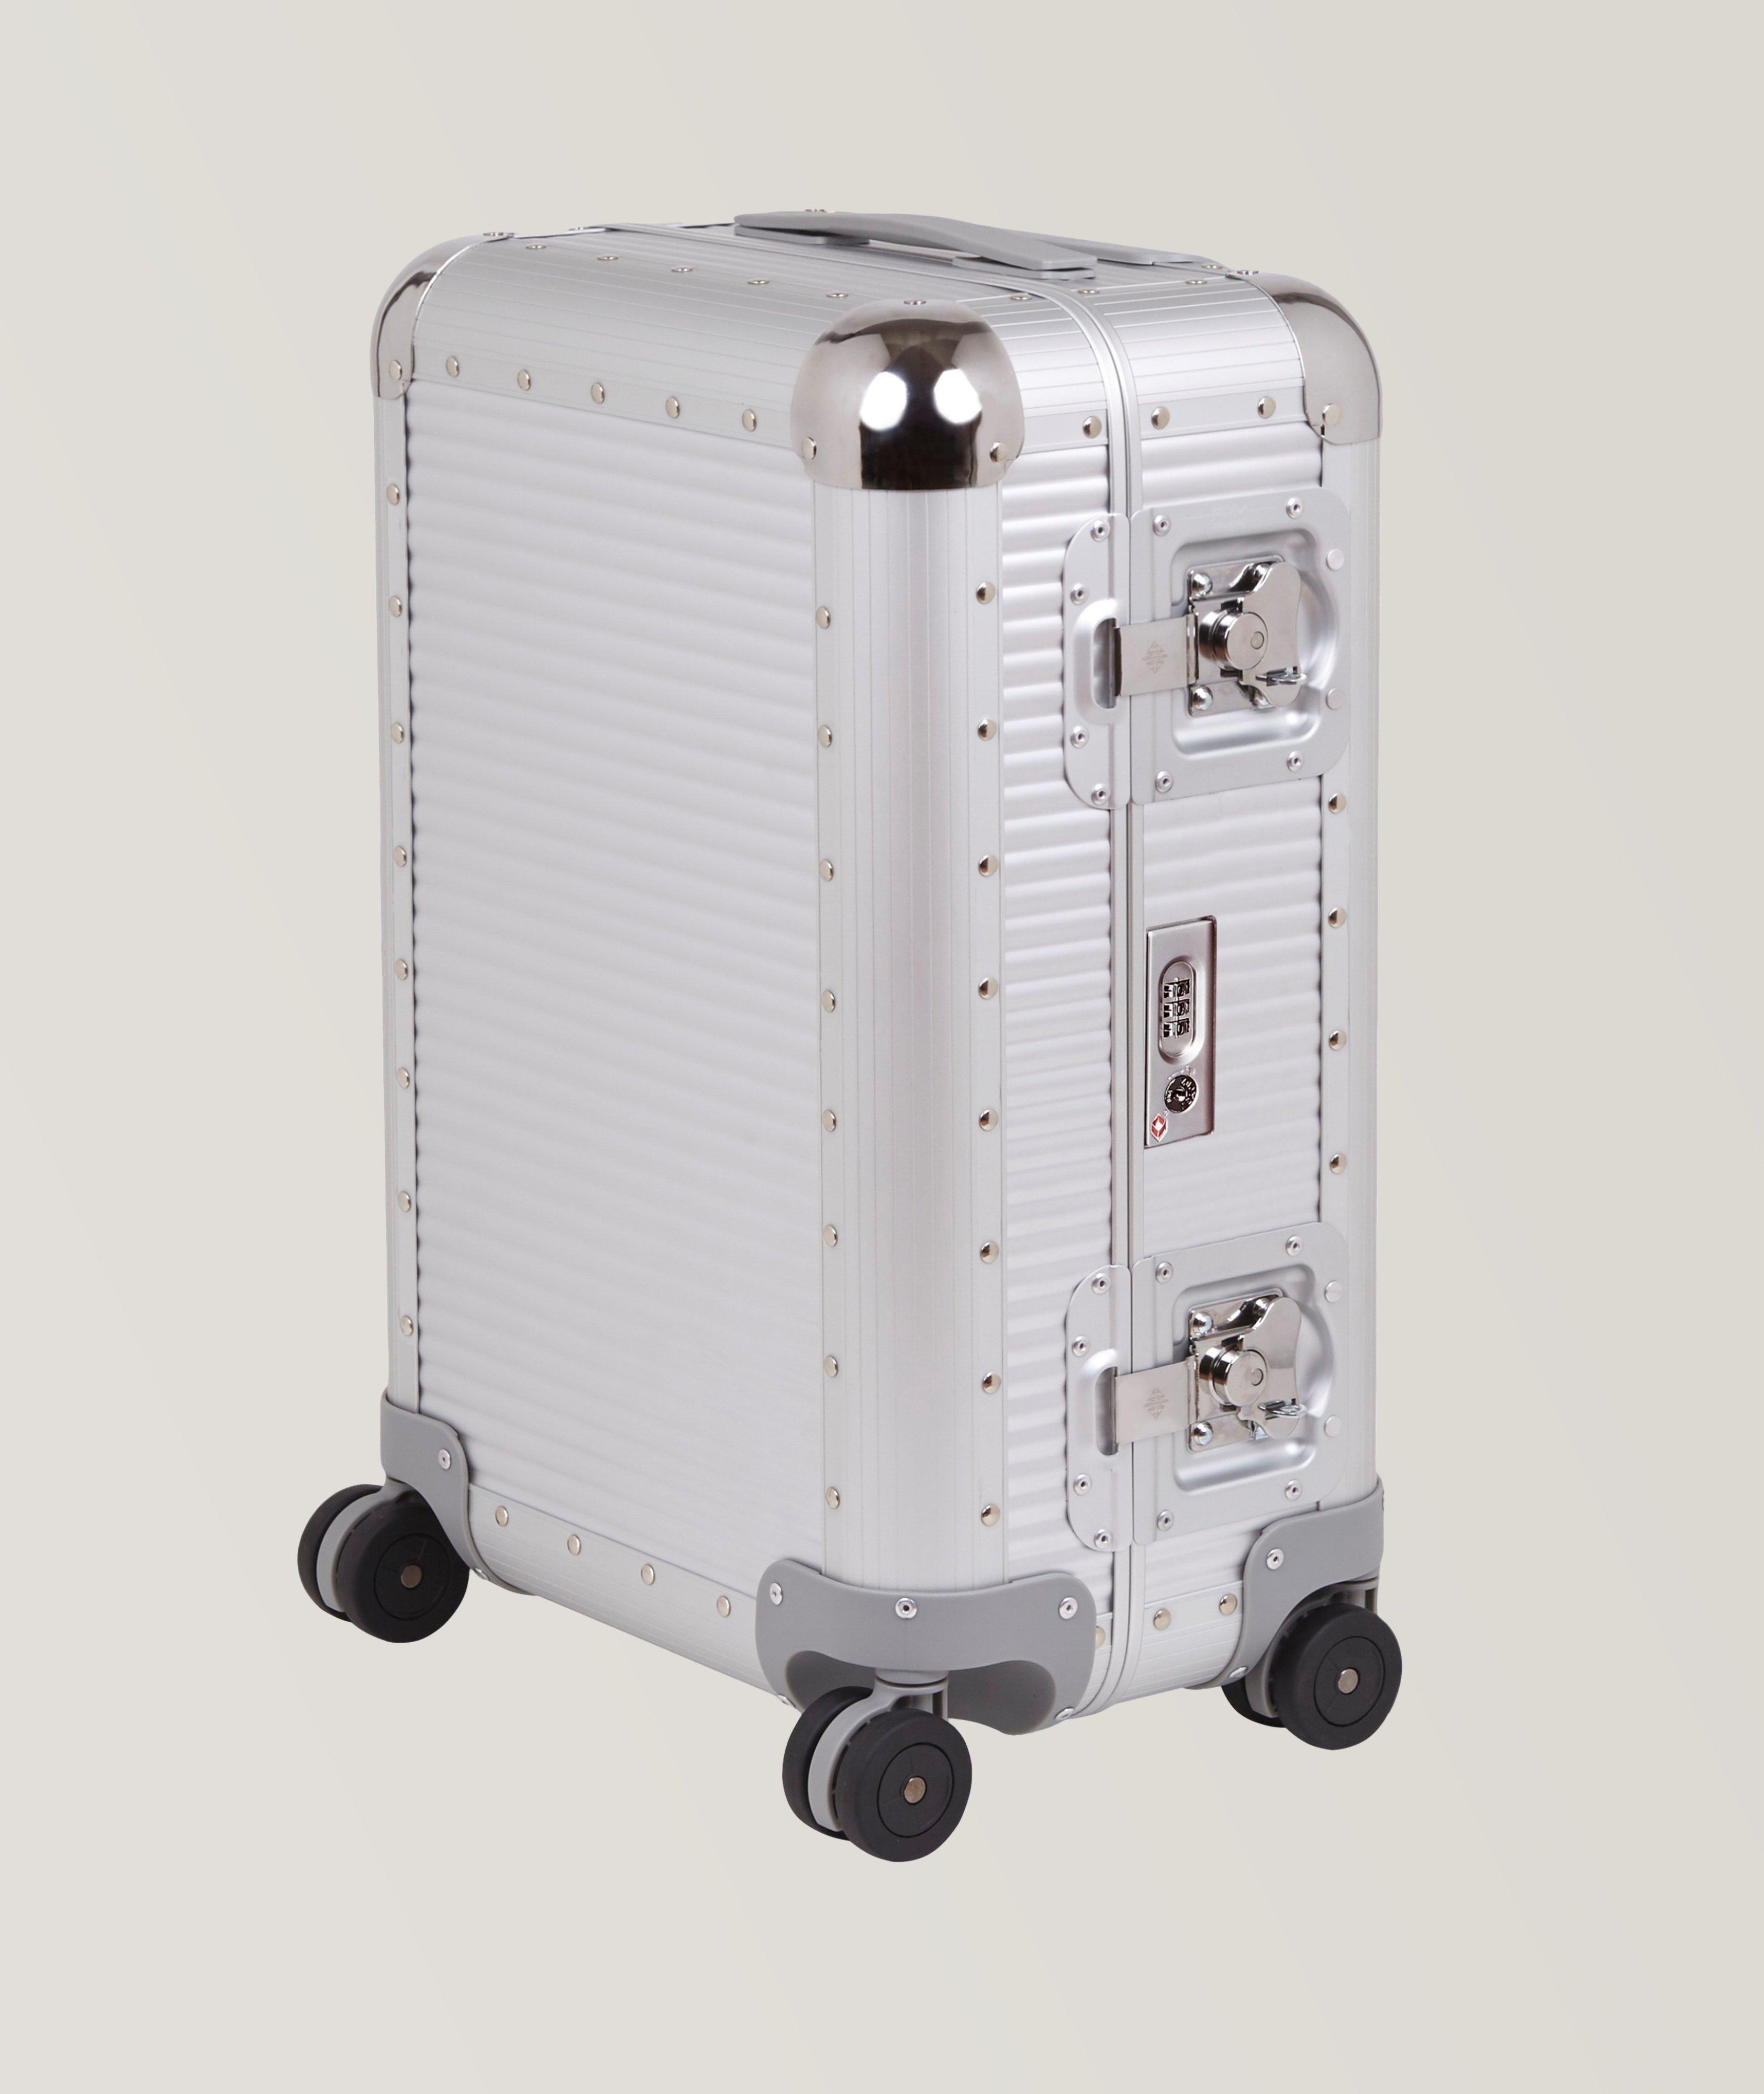 Bank S Spinner 55cm Aluminium Carry-on Luggage image 0